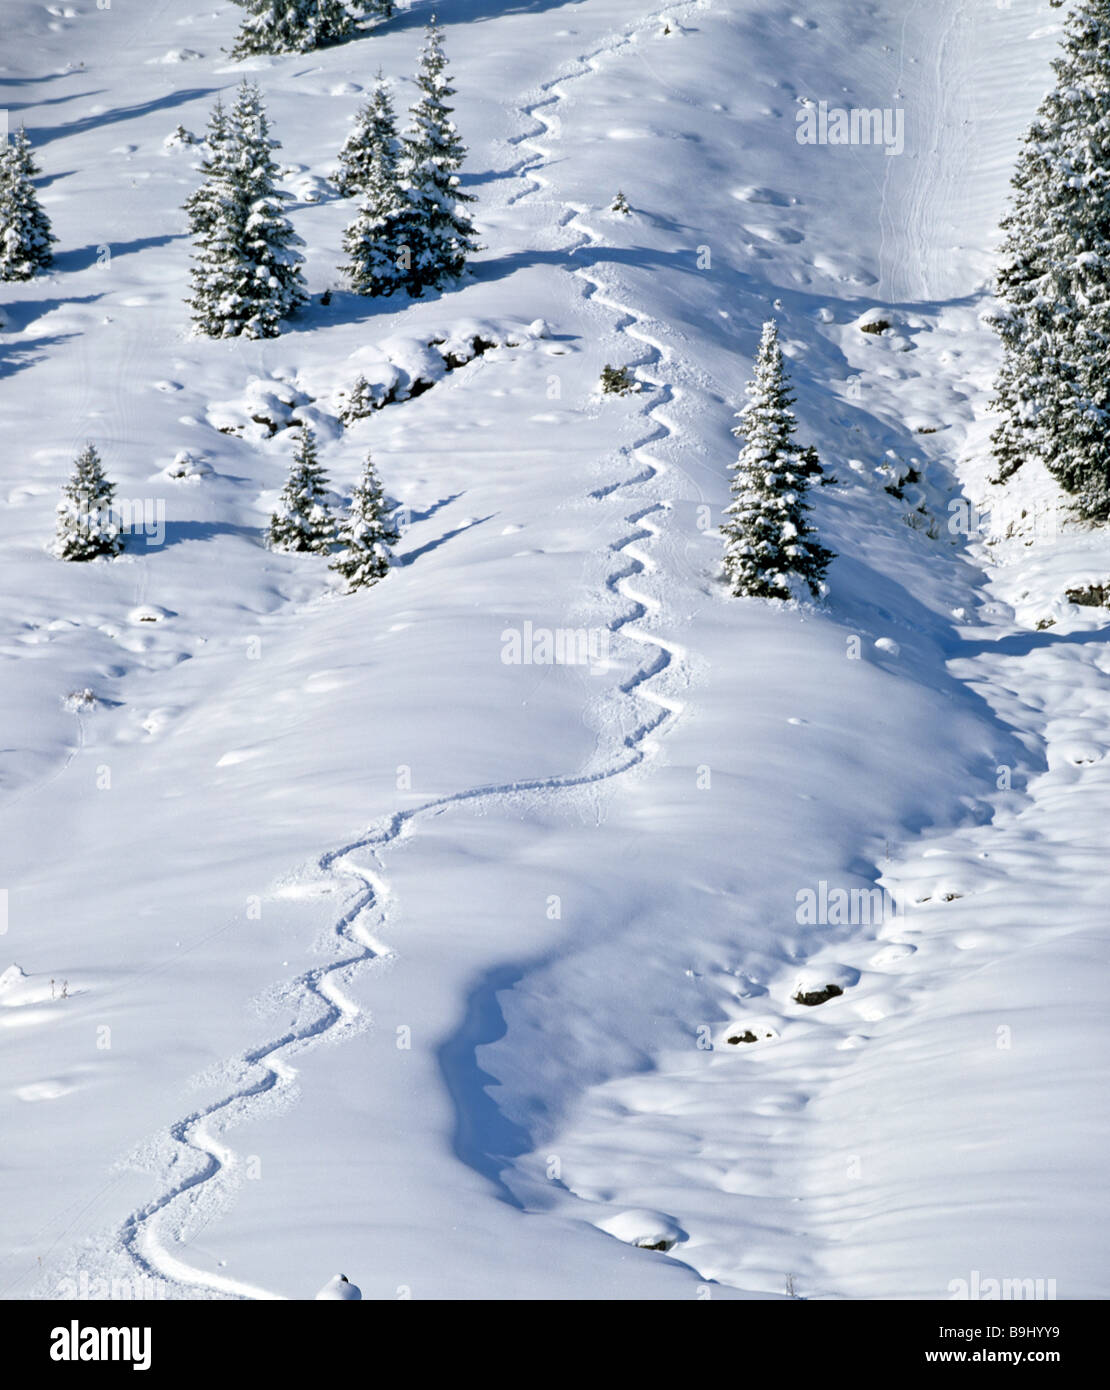 Skiing trails in deep powder snow, wedeling, snoe-covered winter landscape Stock Photo